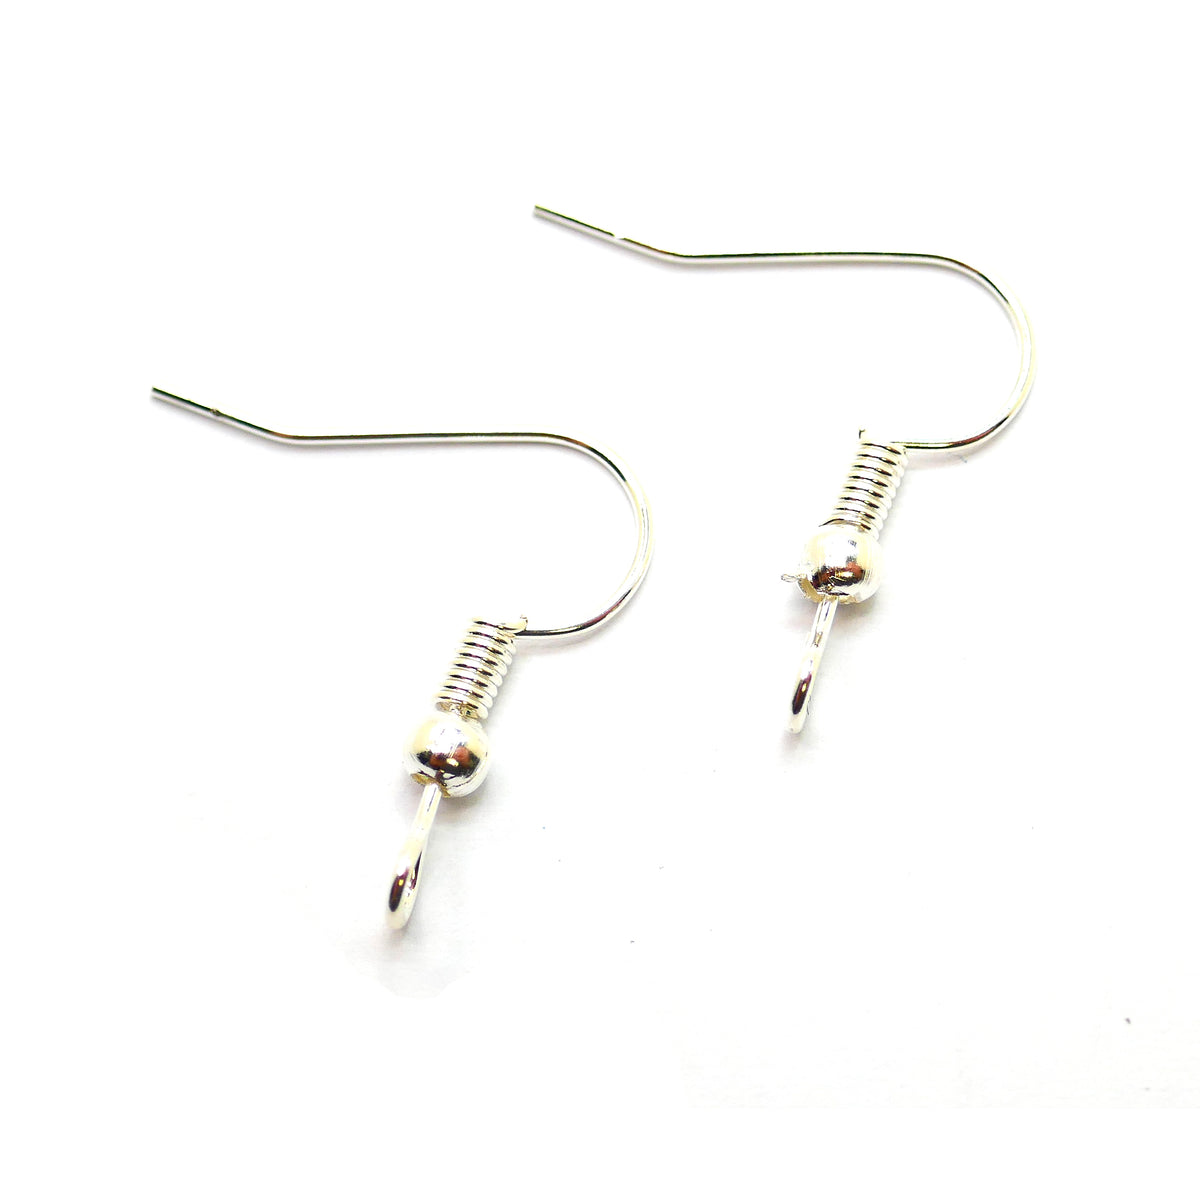 14kt White Gold 3mm Ball End Ear Wires Fish Hook Earring Sold By